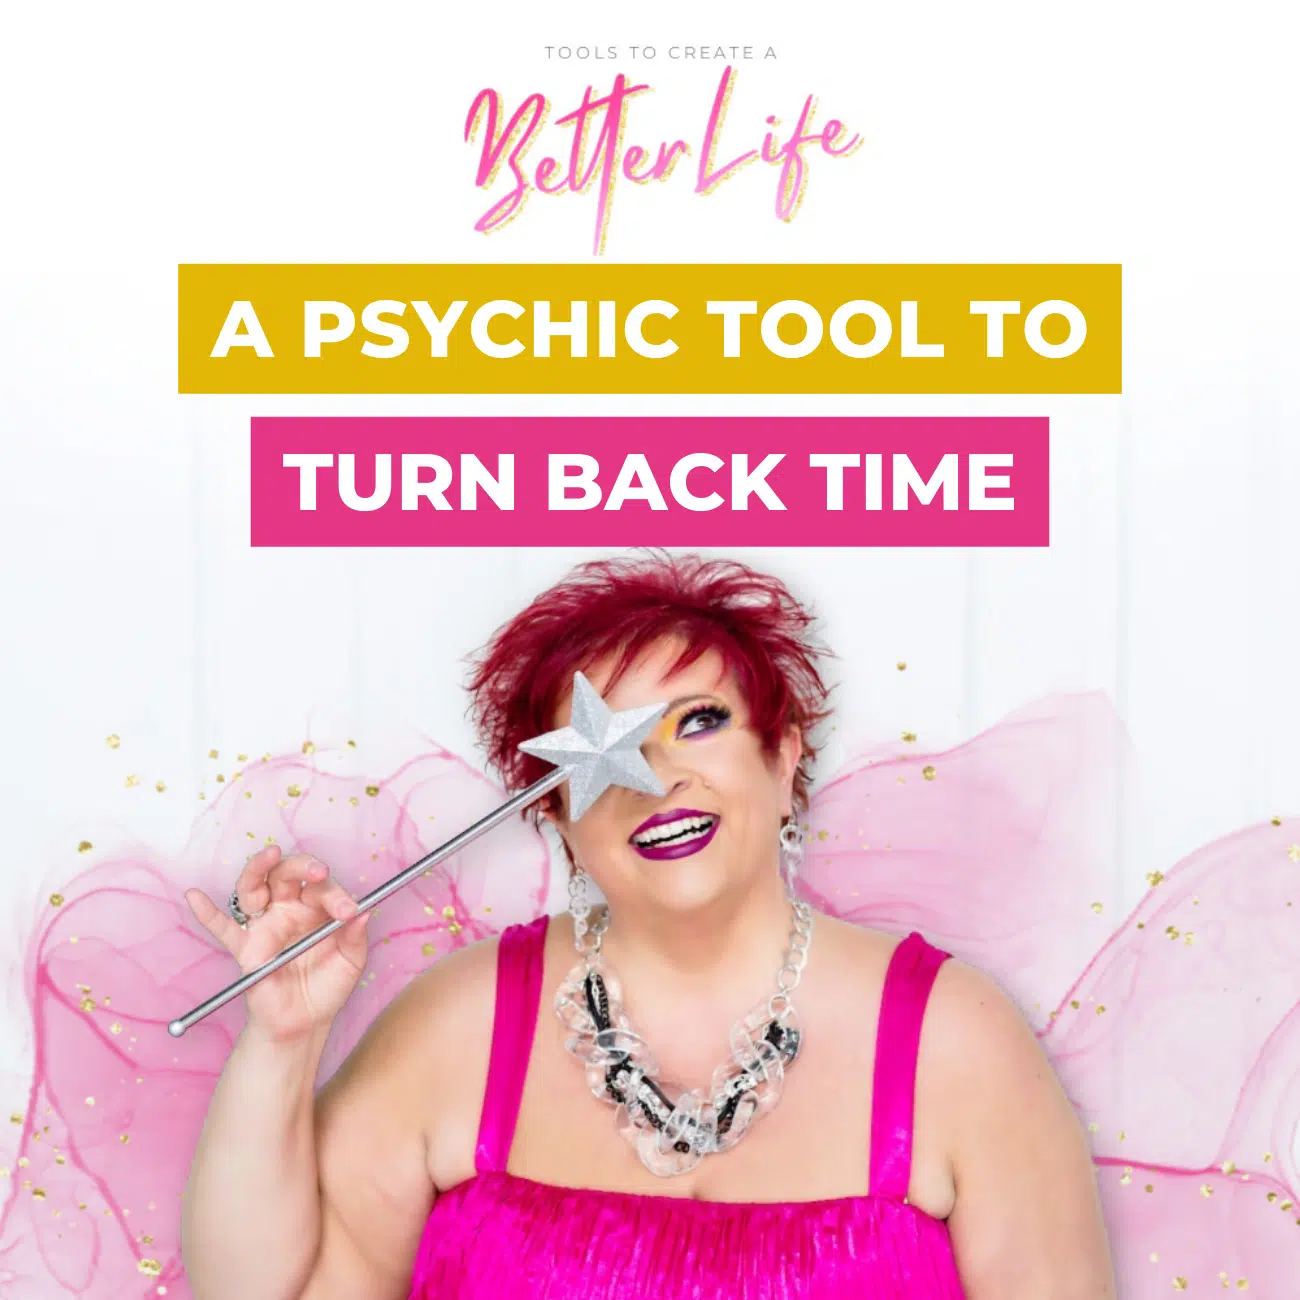 A Psychic Tool to Turn Back Time